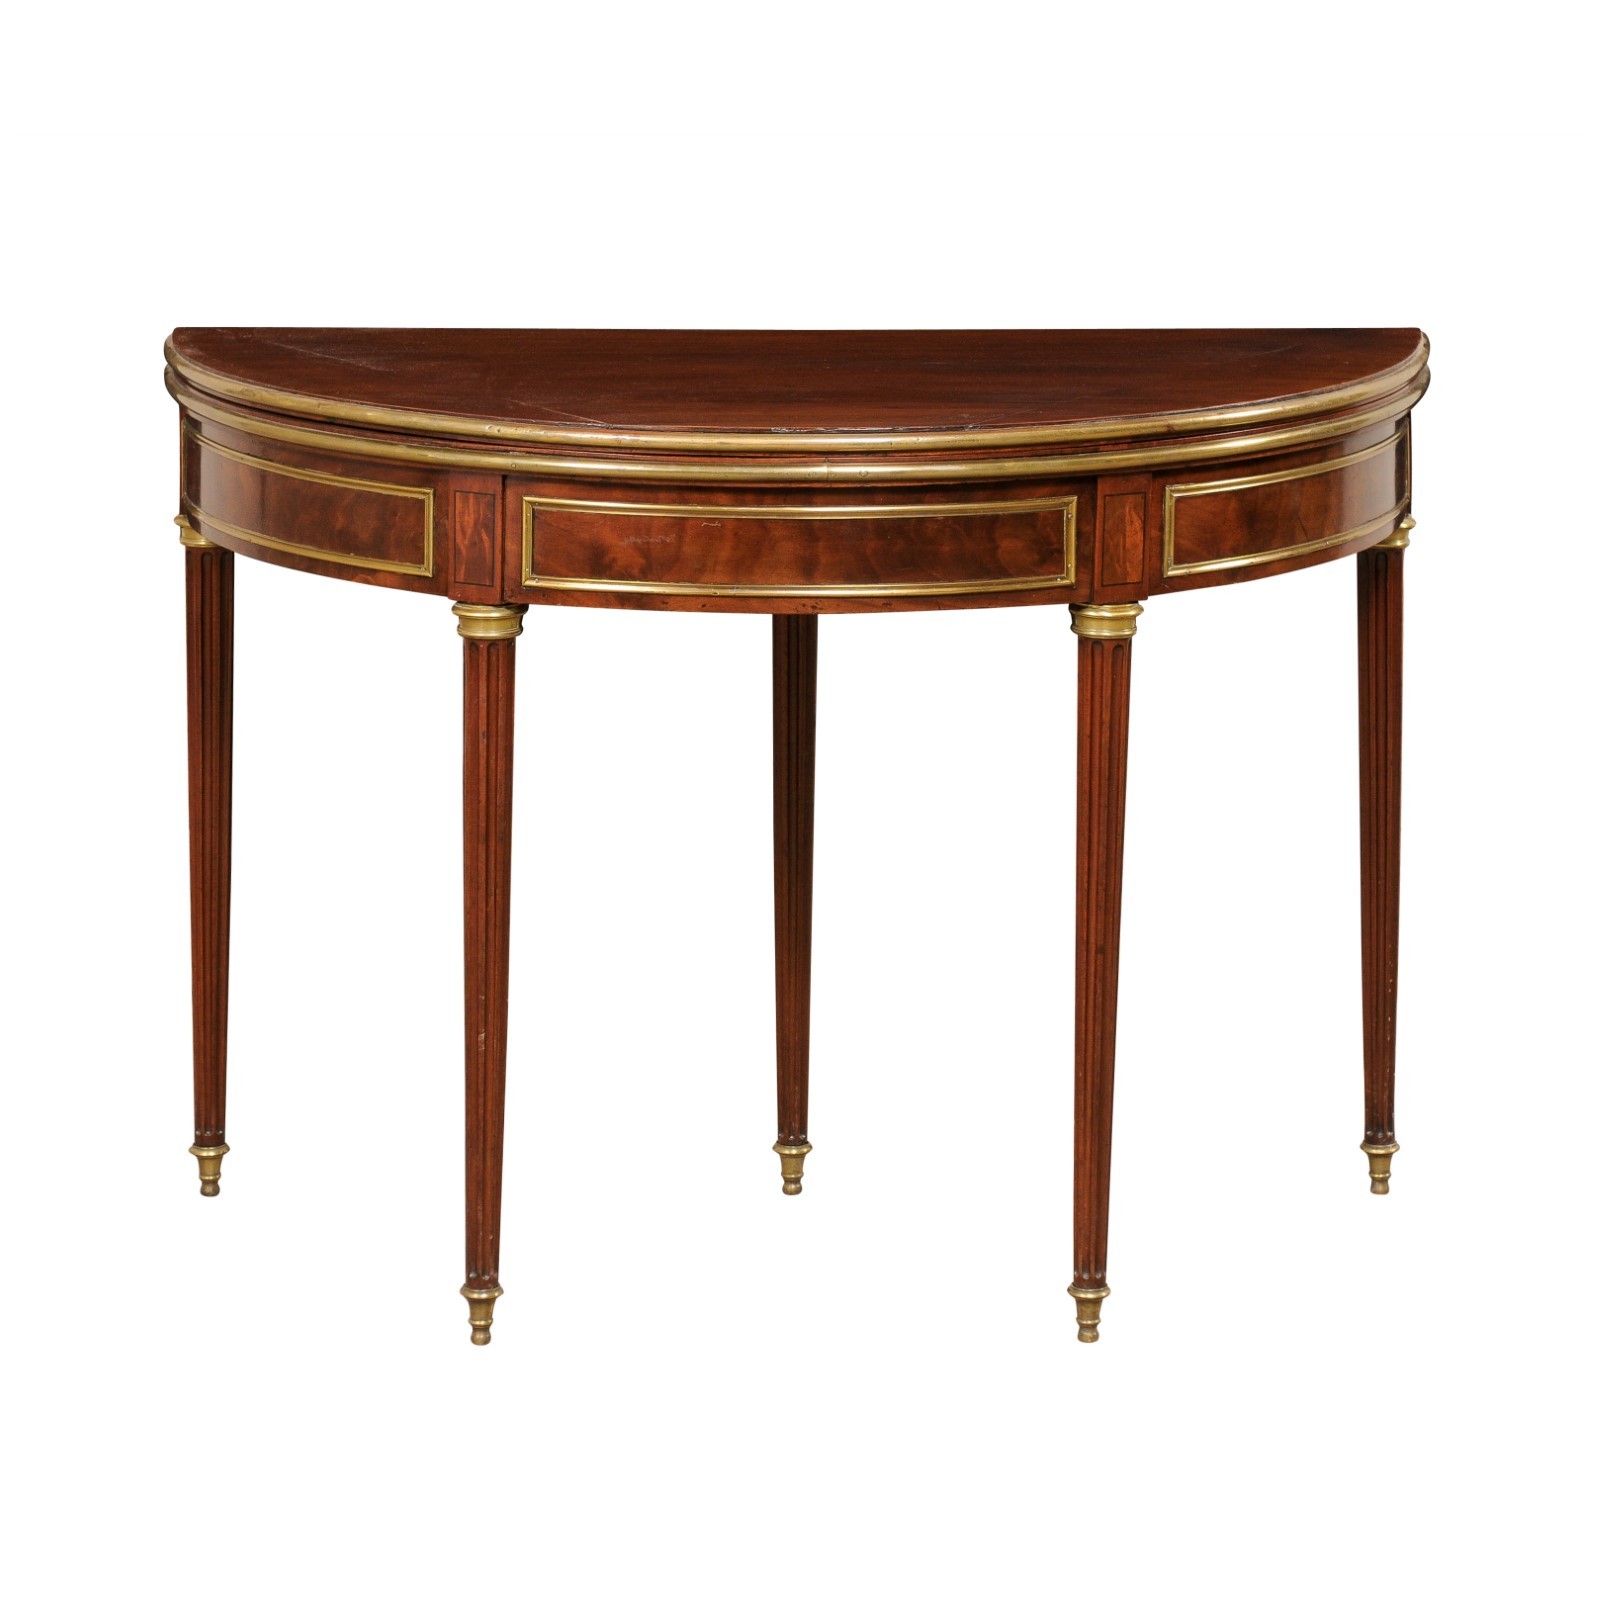 French Neoclassical Brass-Trimmed Demi-Lune